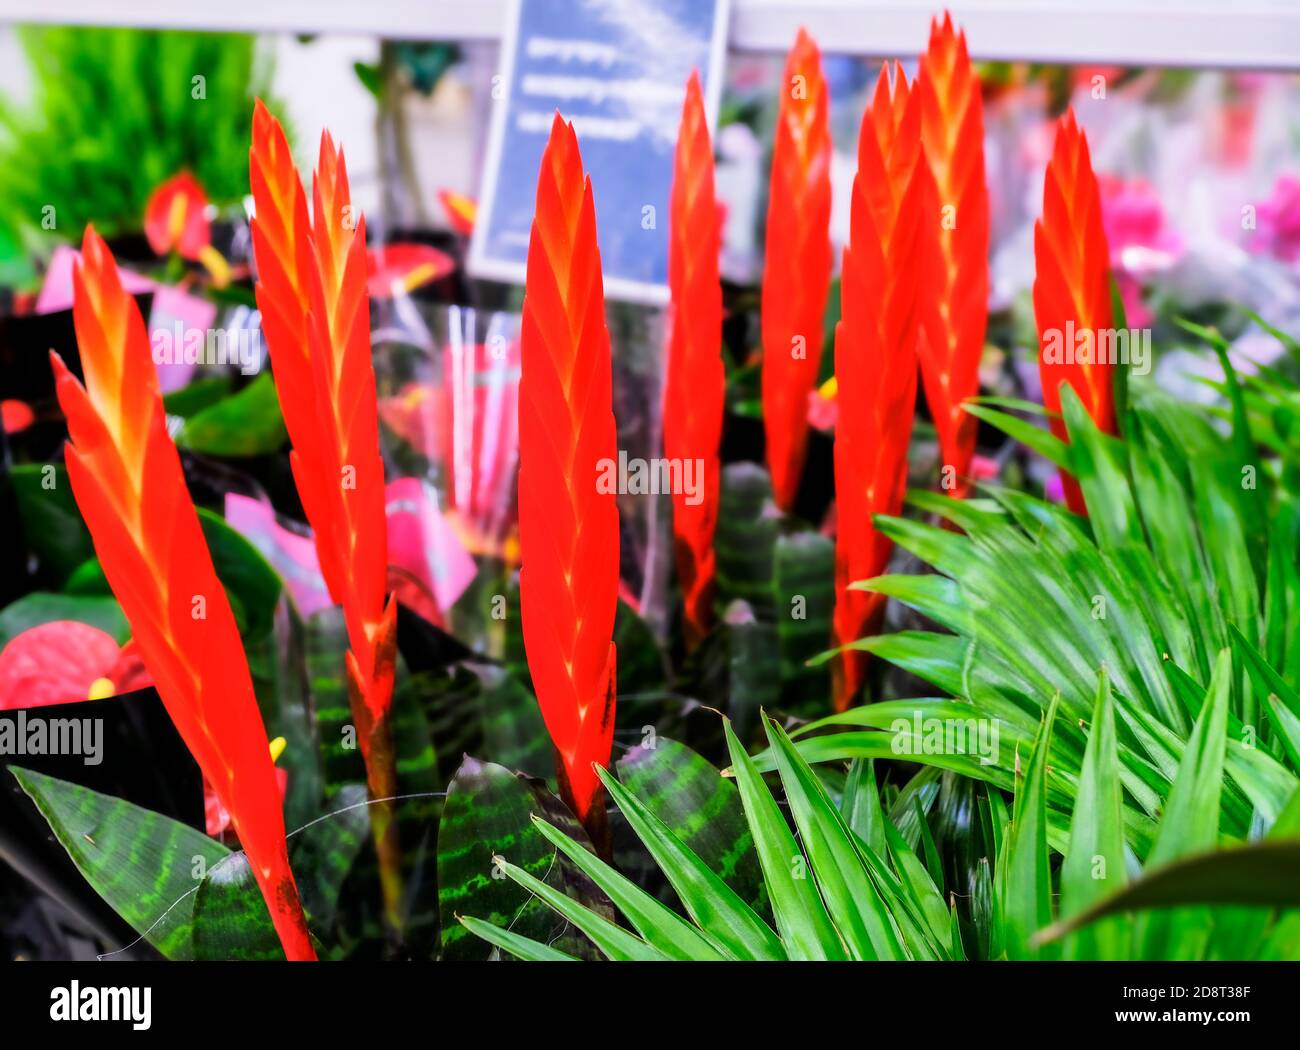 Red Vriesea Bromeliaceae is a tropical ornamental plant at floral market. Stock Photo